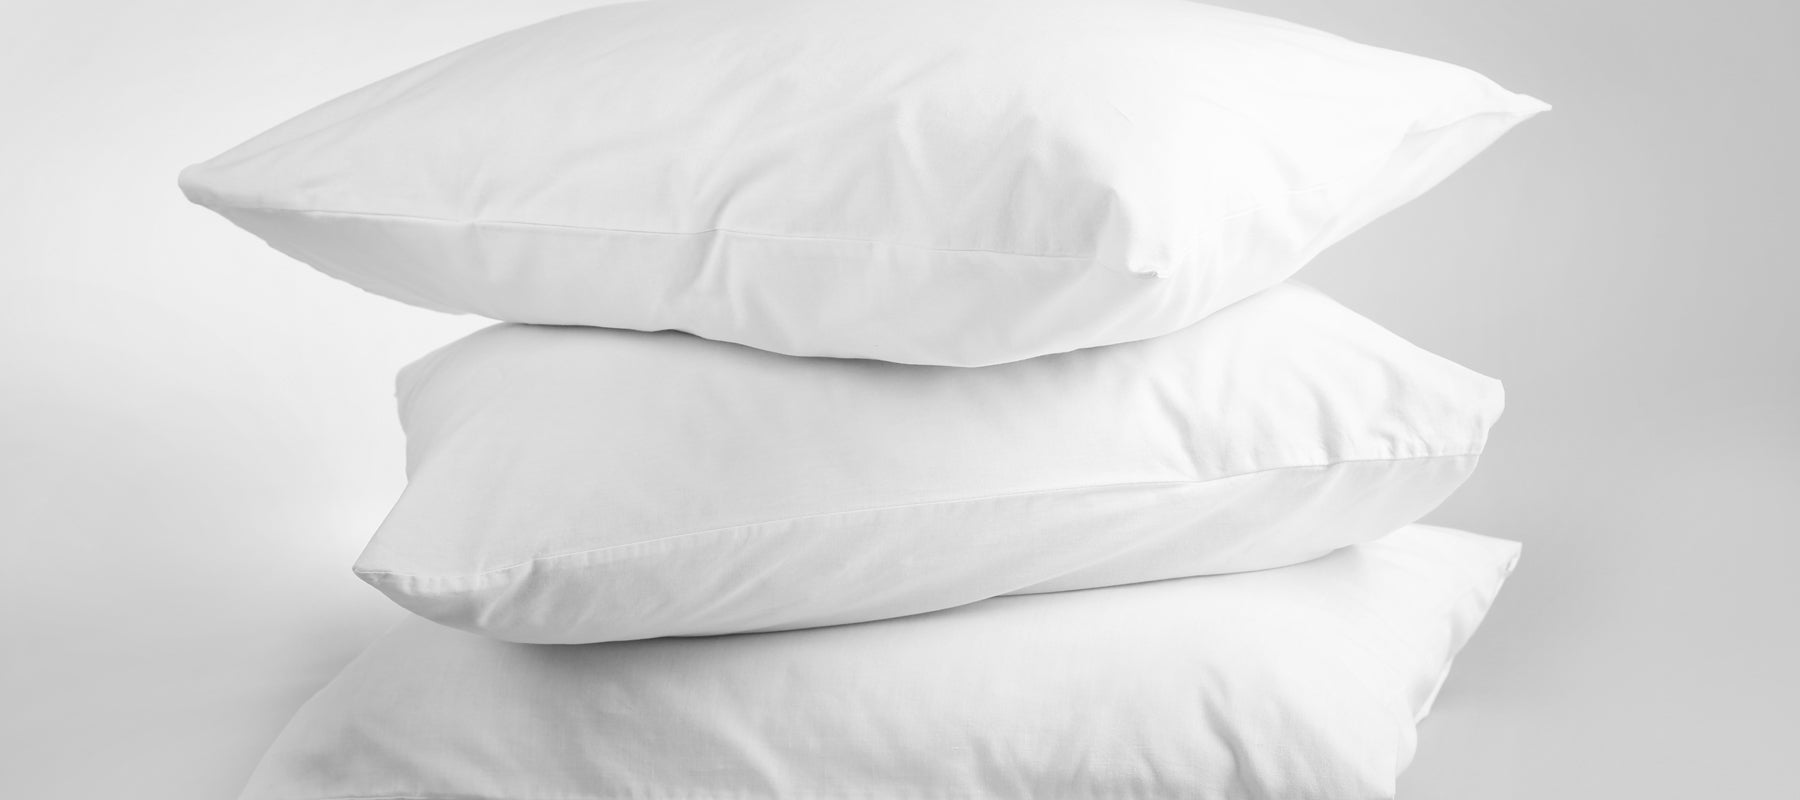 How to Choose a Pillow: Find the Perfect Type of Pillow for You